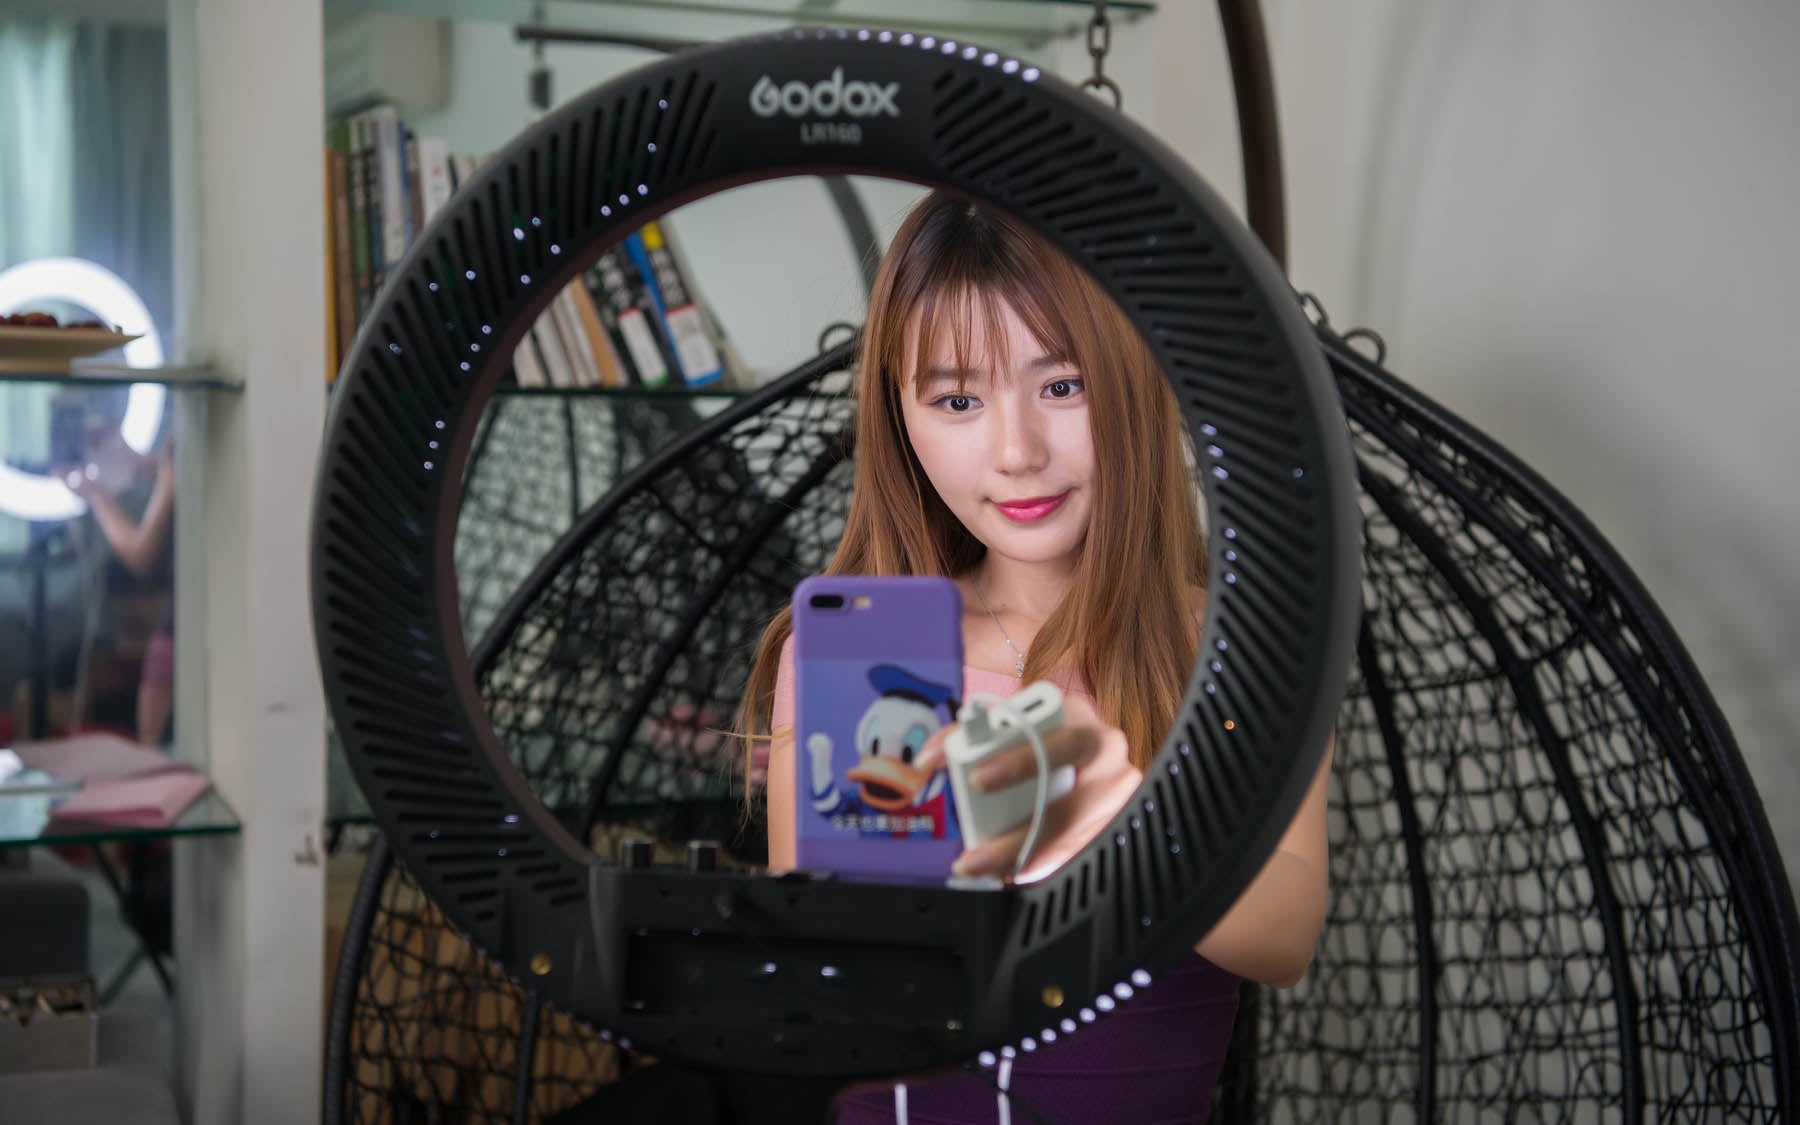 LR160 ring light is perfect for Content Creation